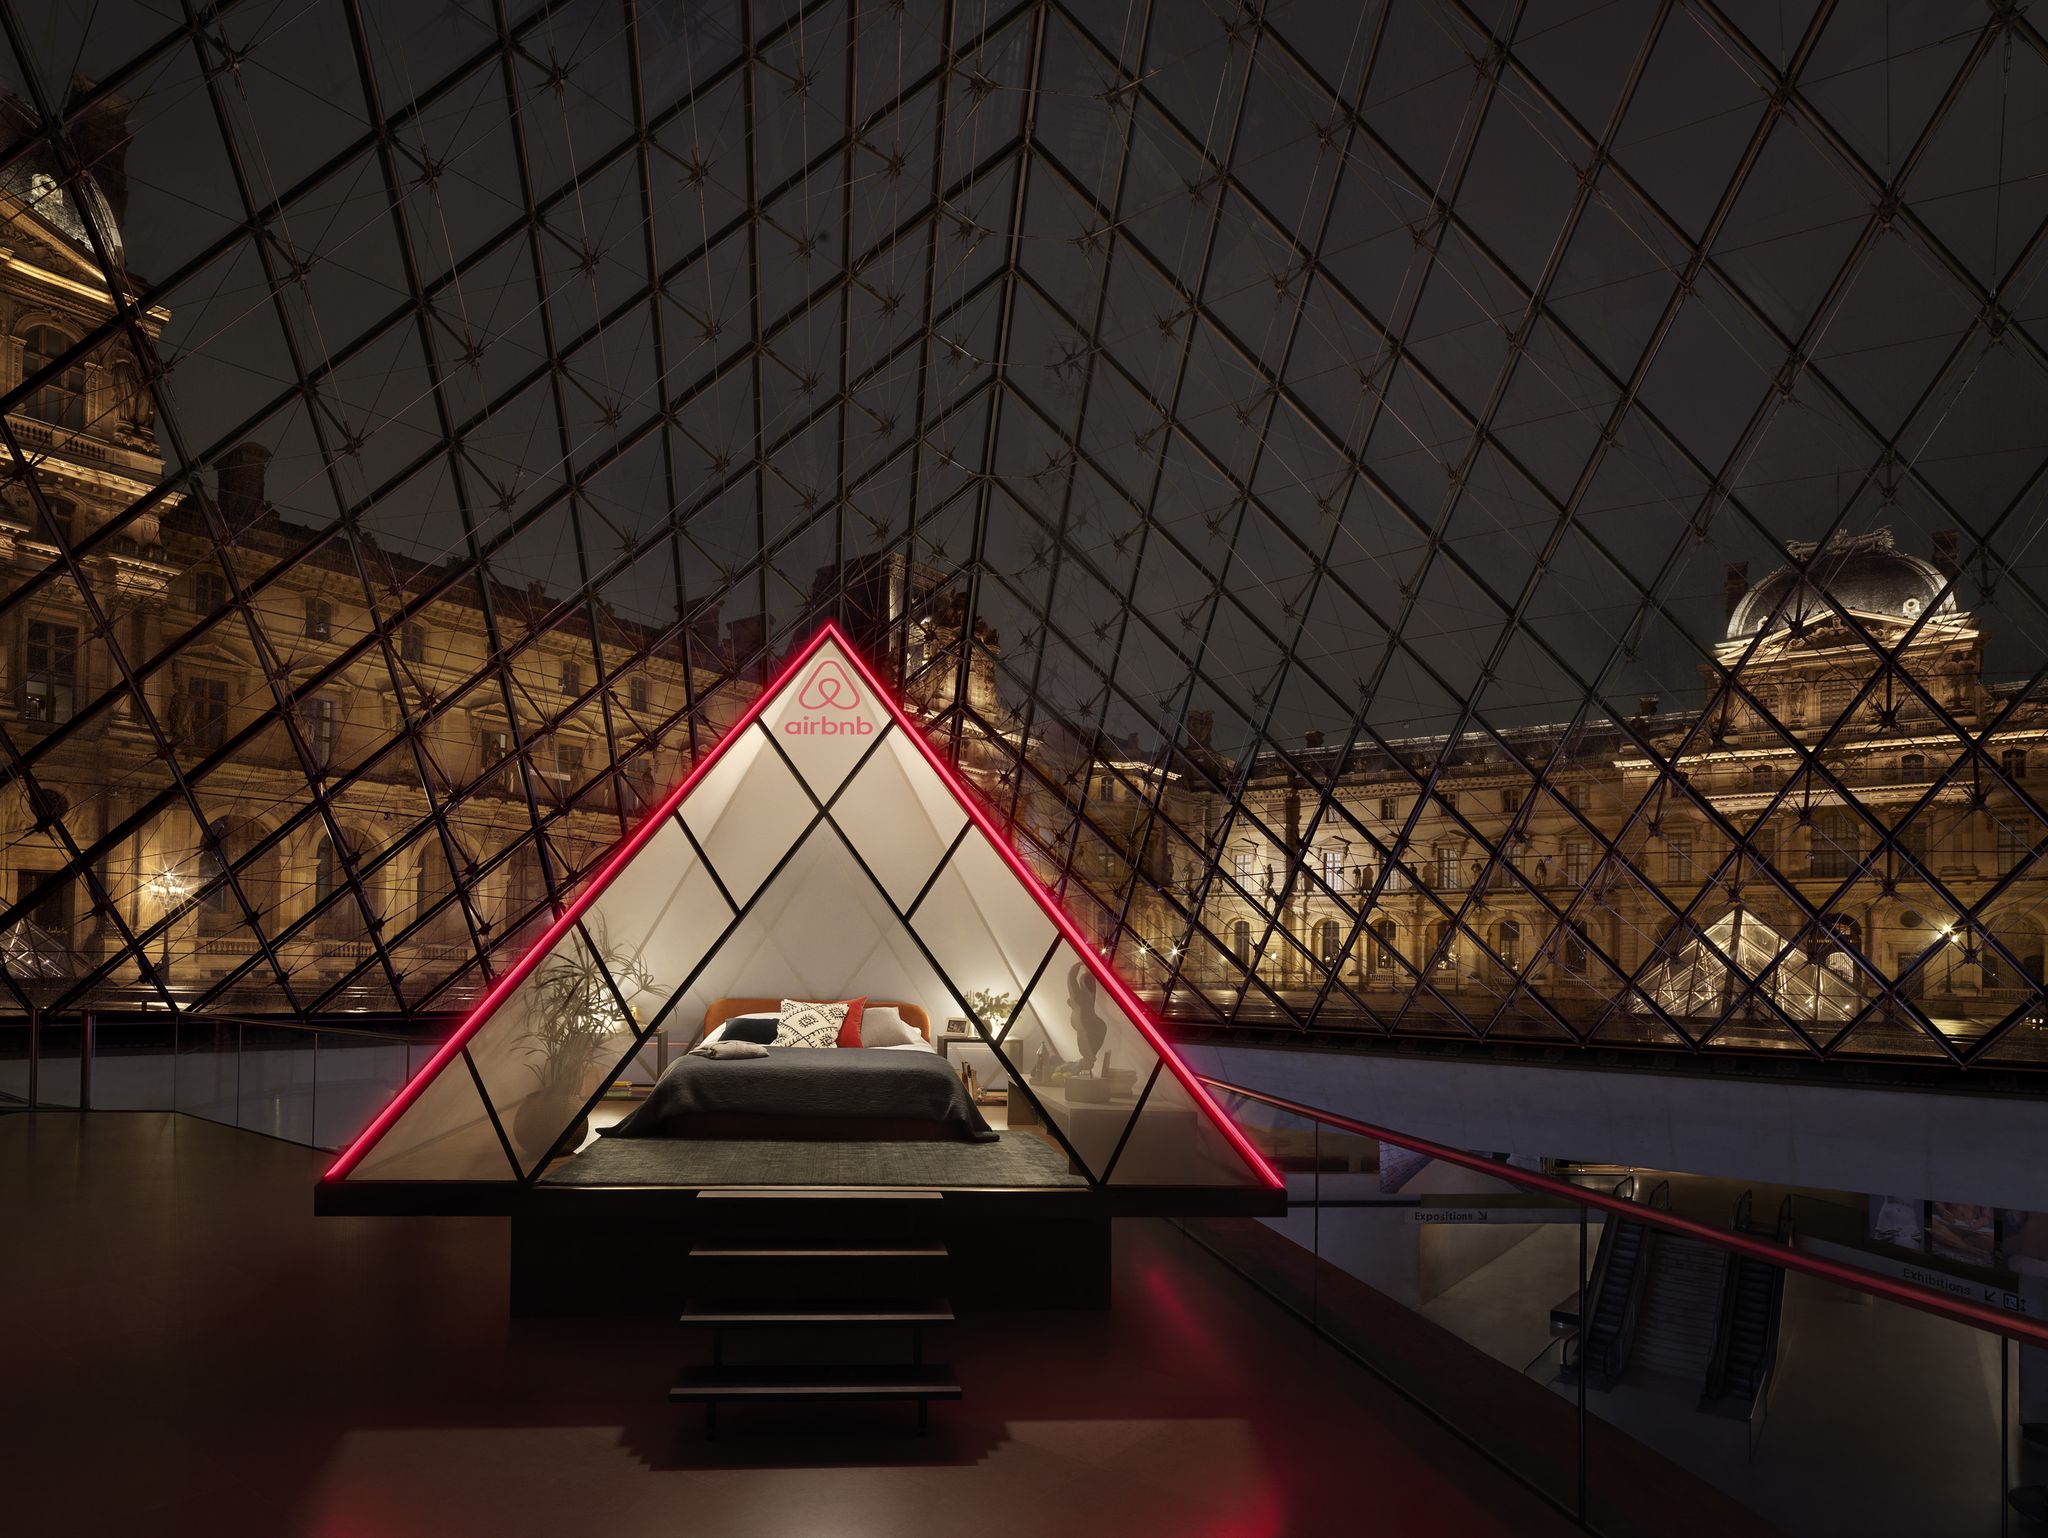 Airbnb teams up with world-famous Louvre Museum in Paris, France